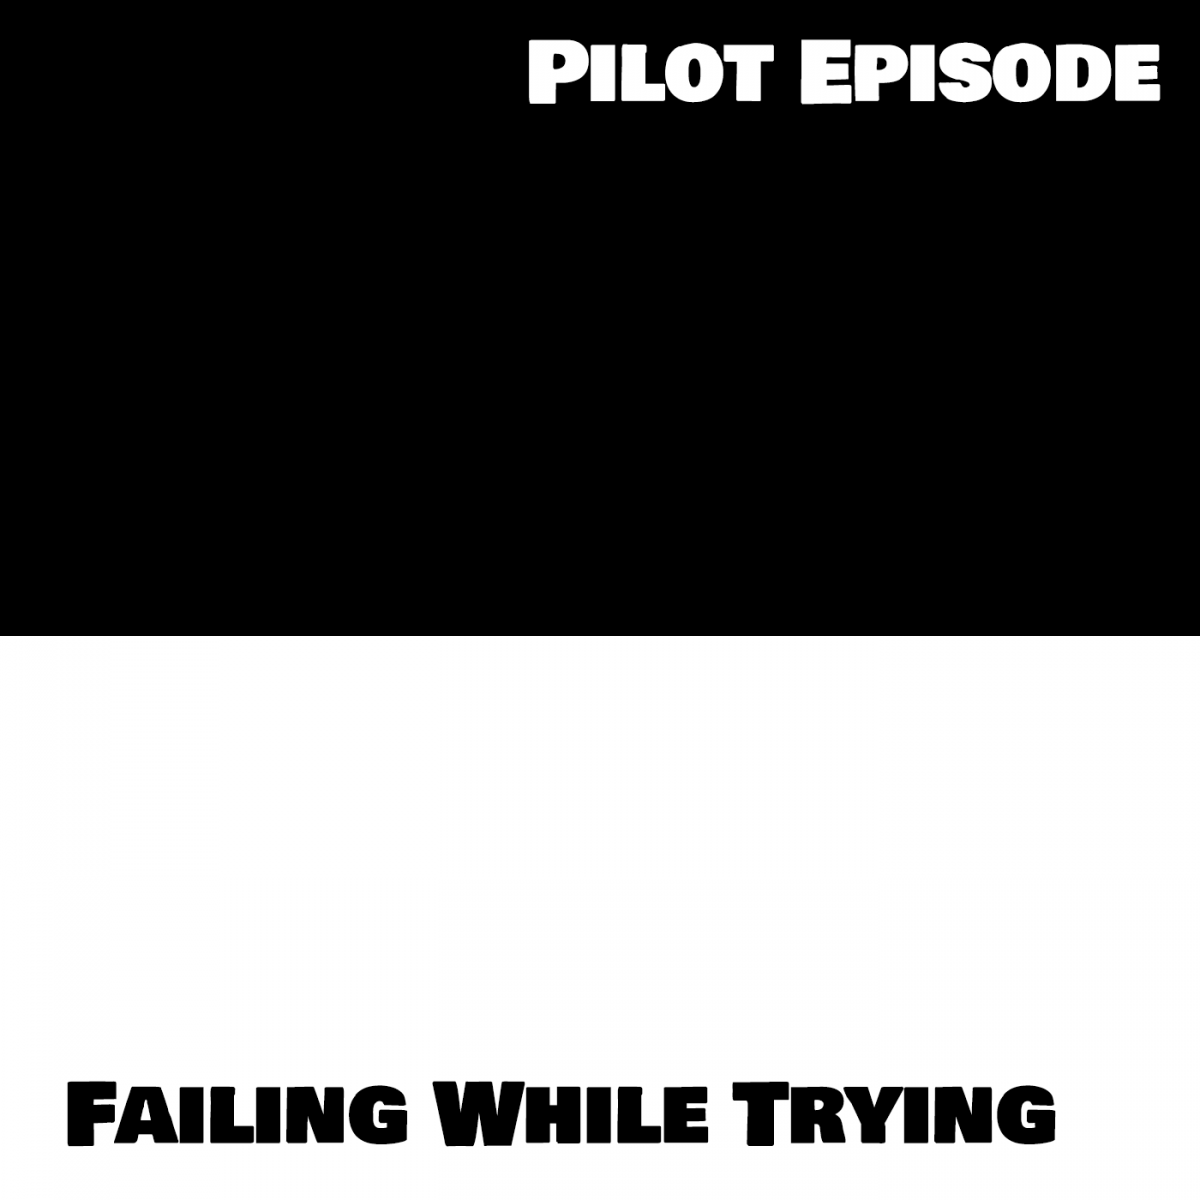 Pilot Episode: Failing While Trying